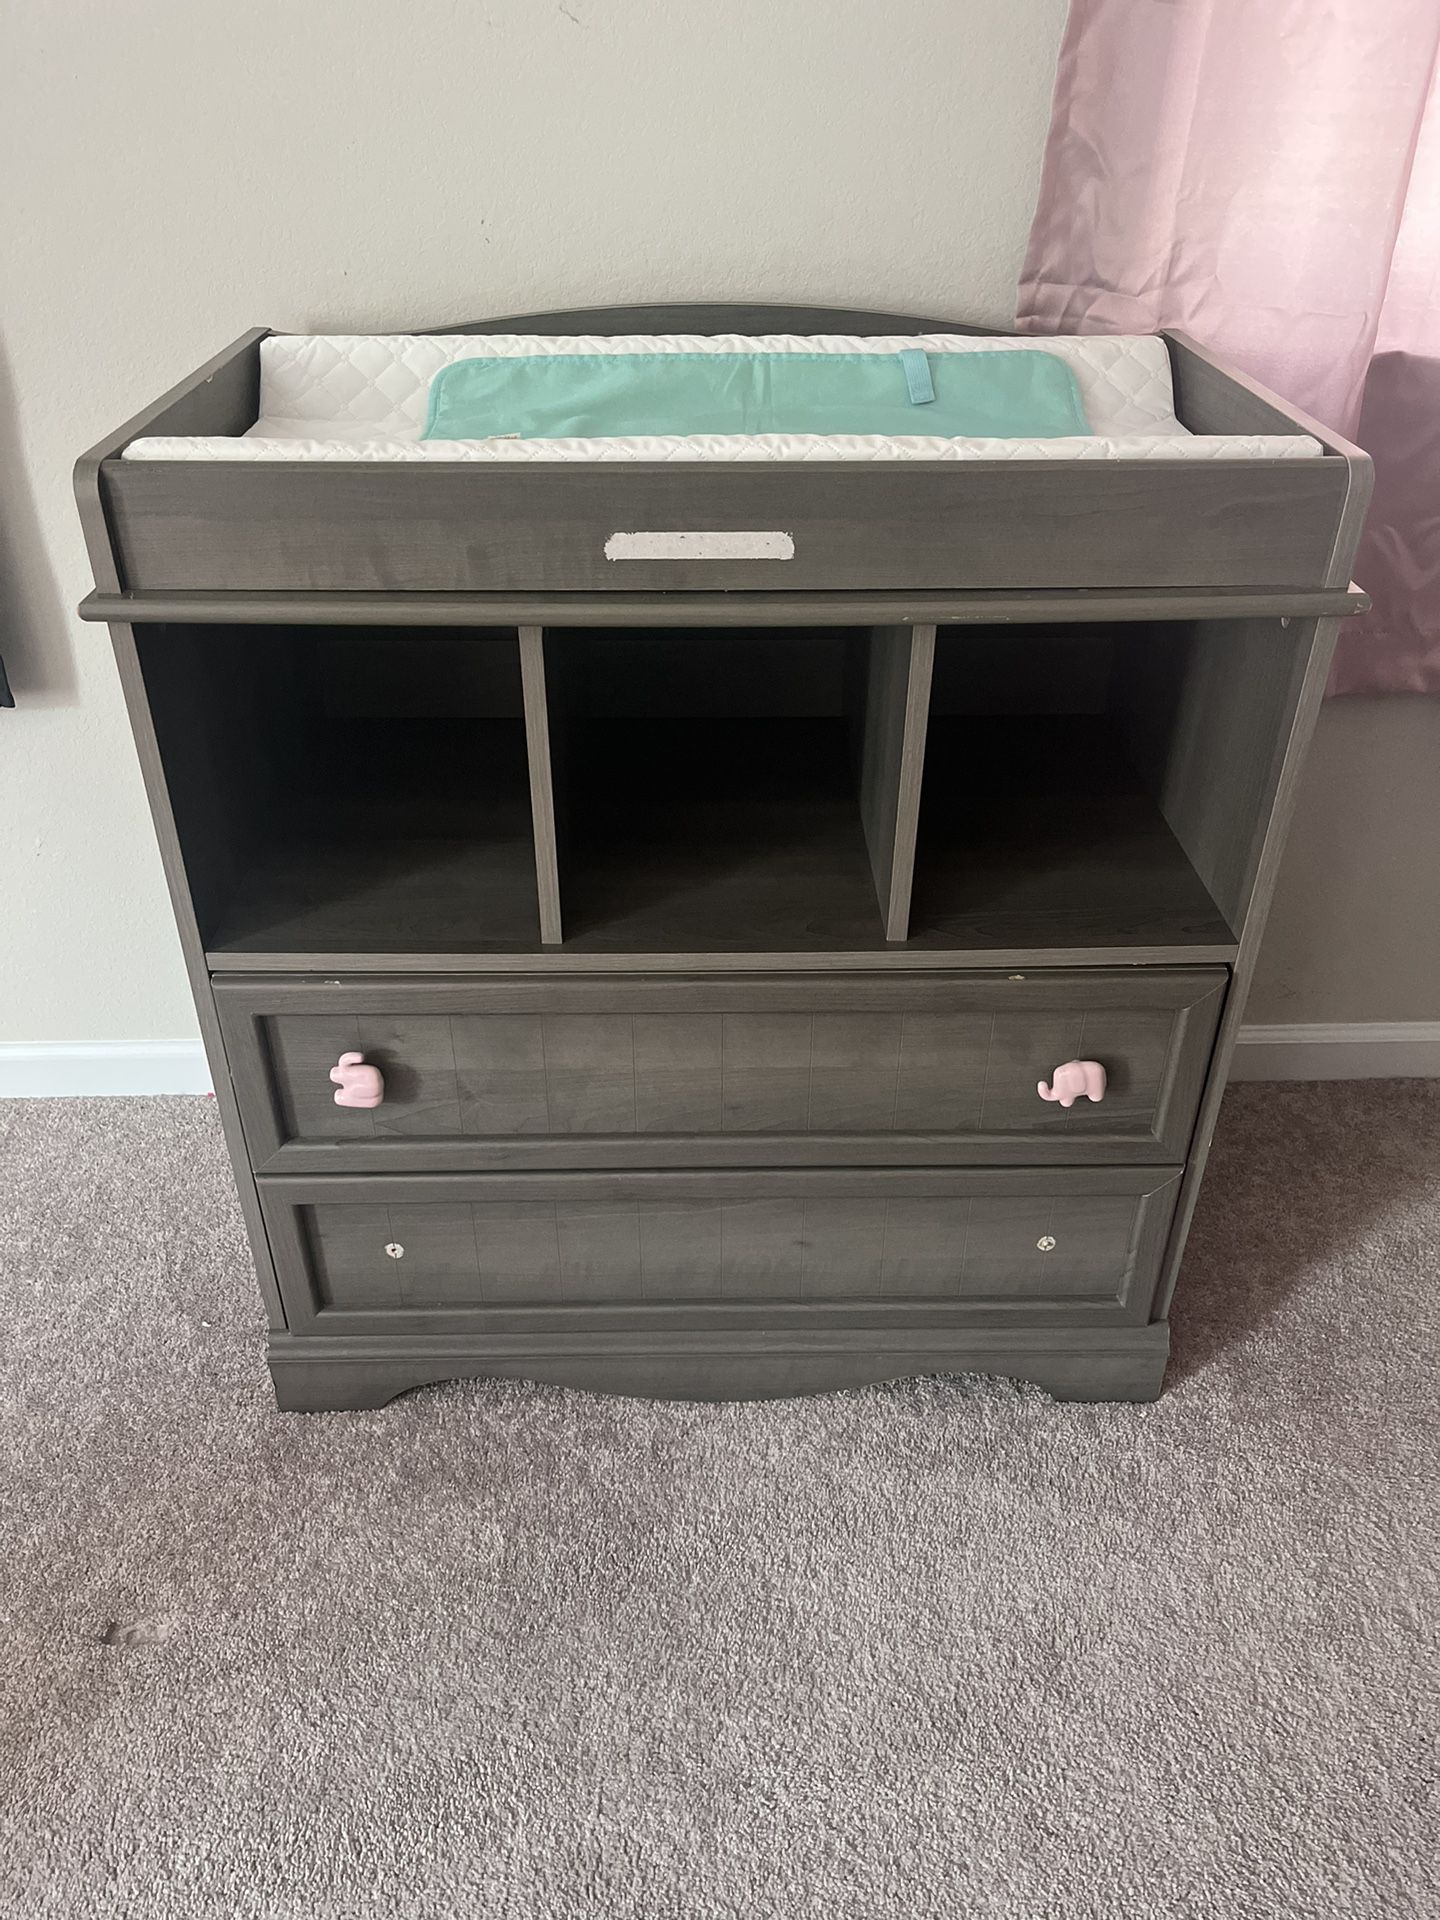 Fisher Price Changing Table And Dresser 